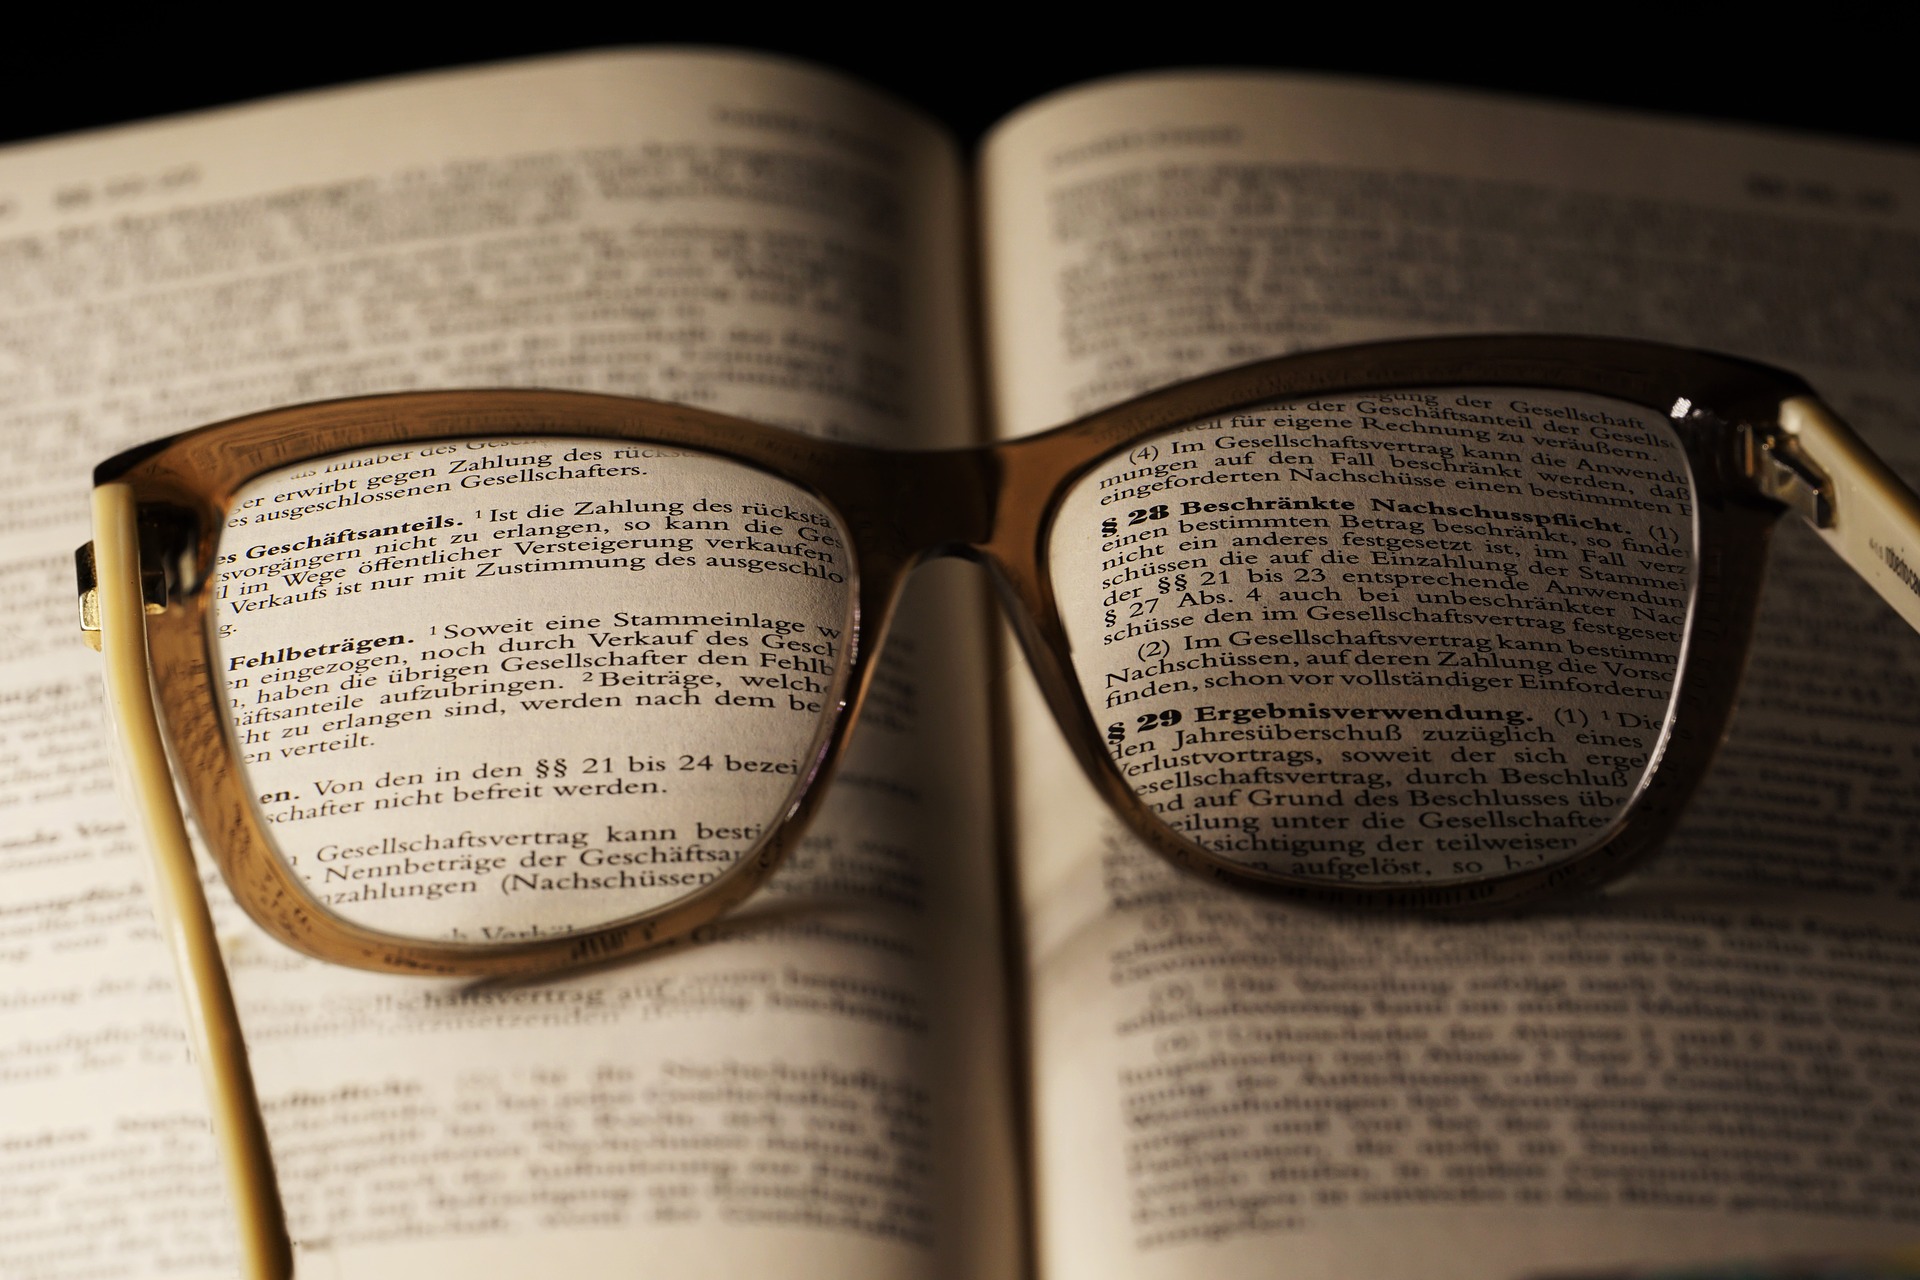 Reading glasses on book